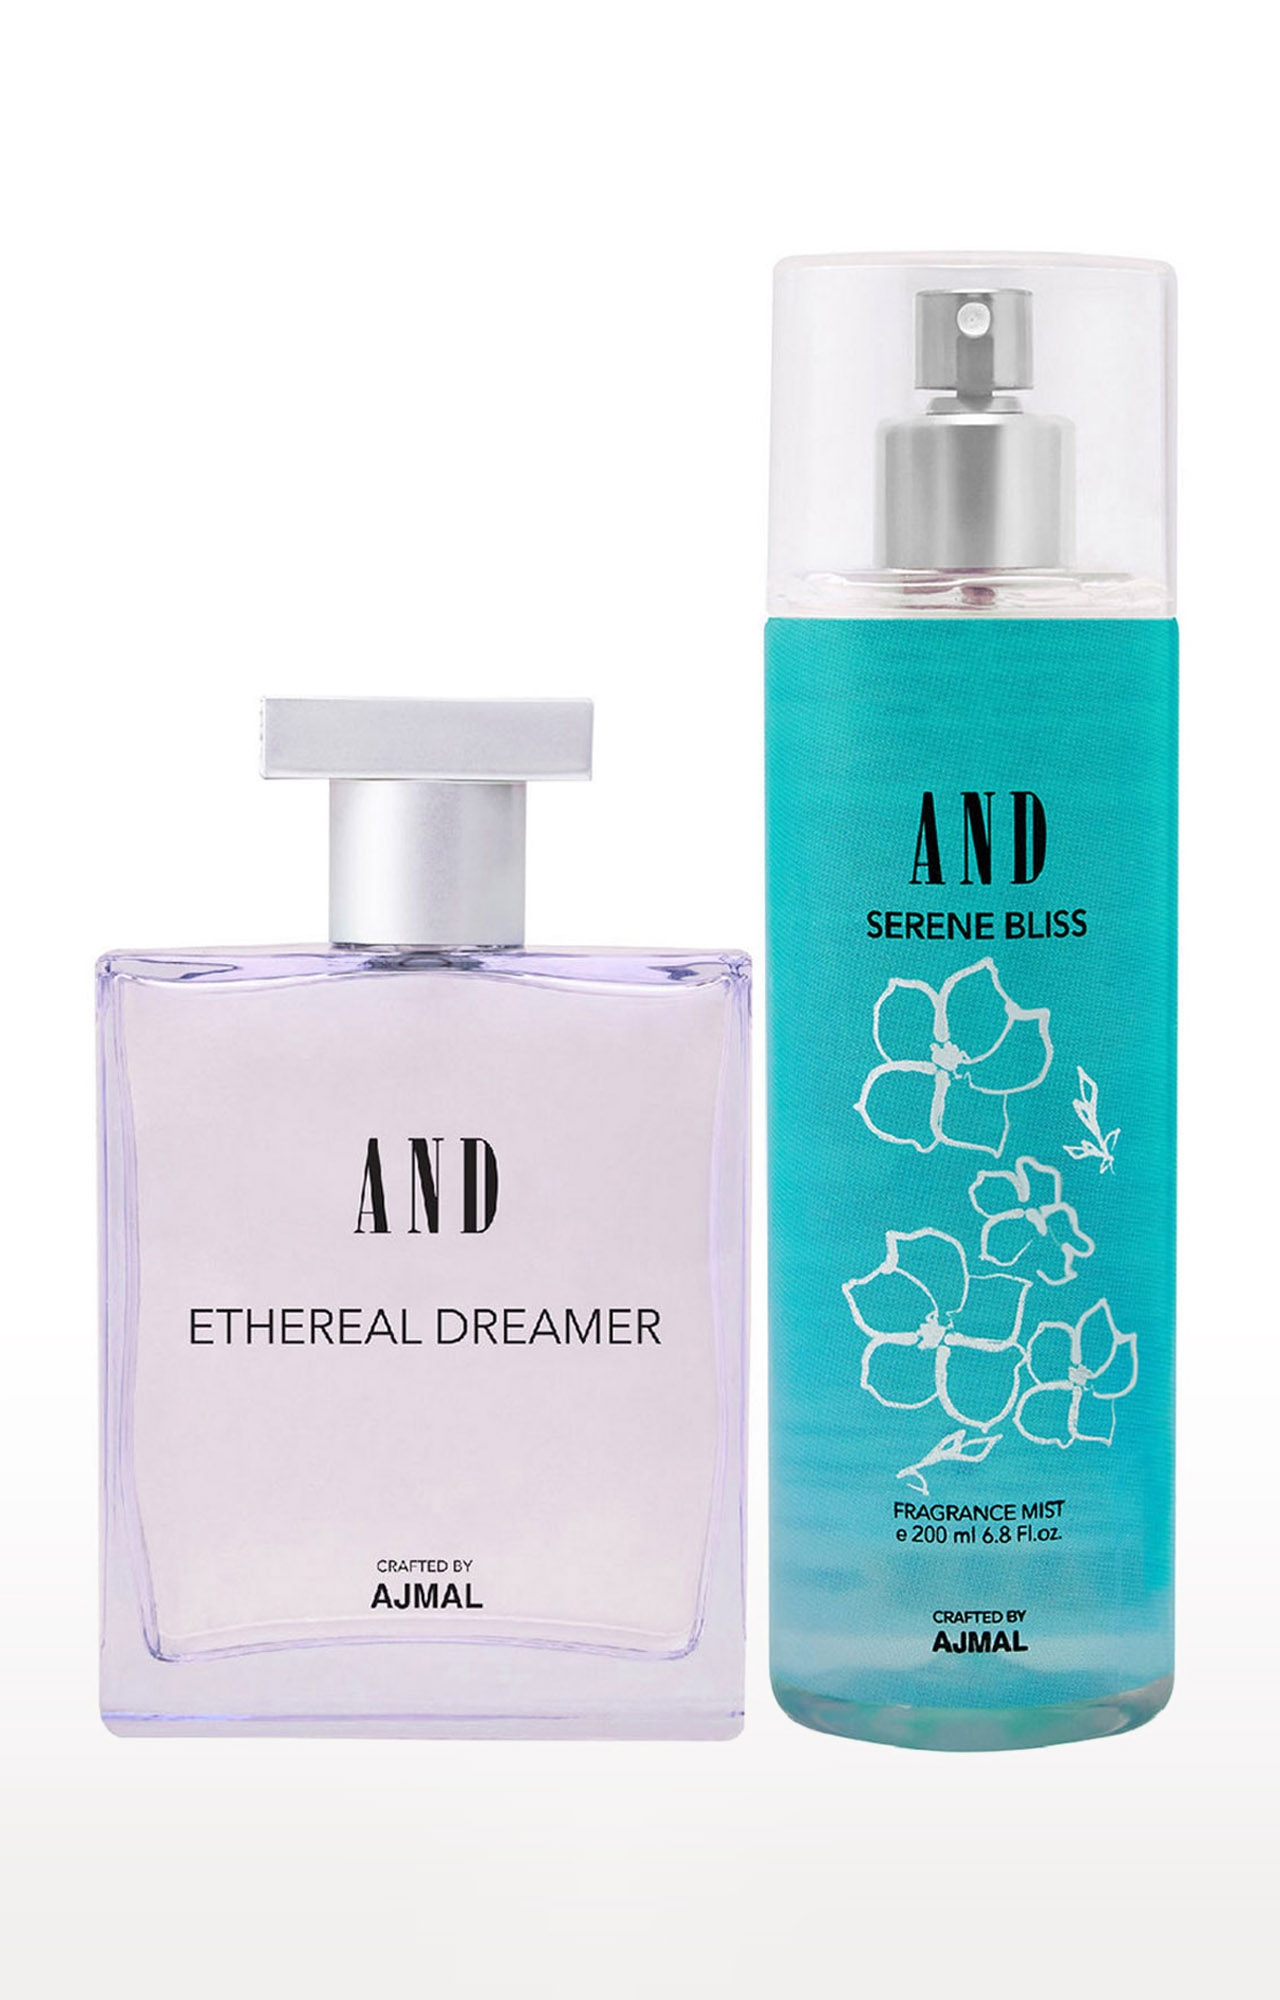 AND Crafted By Ajmal | AND Ethereal Dreamer Eau De Parfum 100ML & Serene Bliss Body Mist 200ML Pack of 2 for Women Crafted by Ajmal 